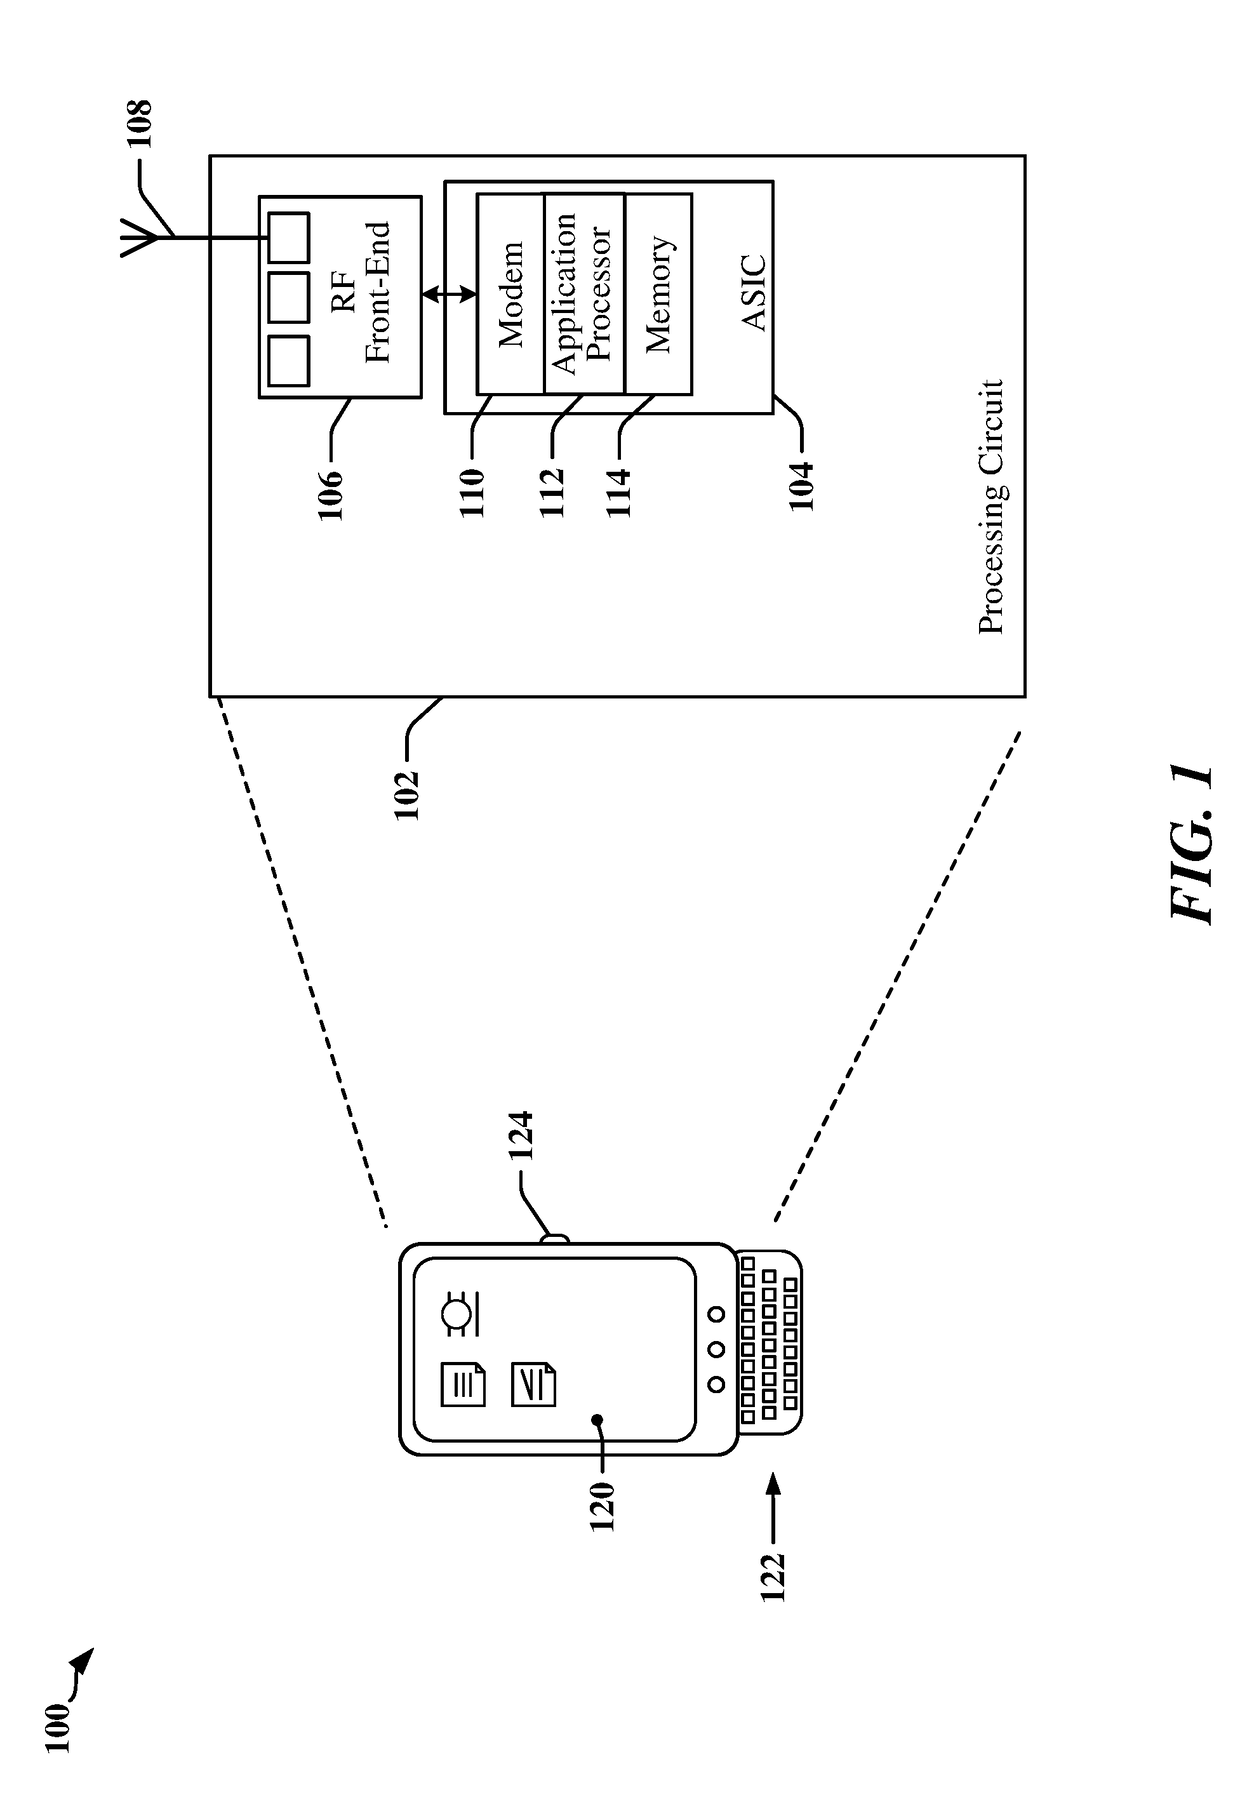 Low-latency low-uncertainty timer synchronization mechanism across multiple devices